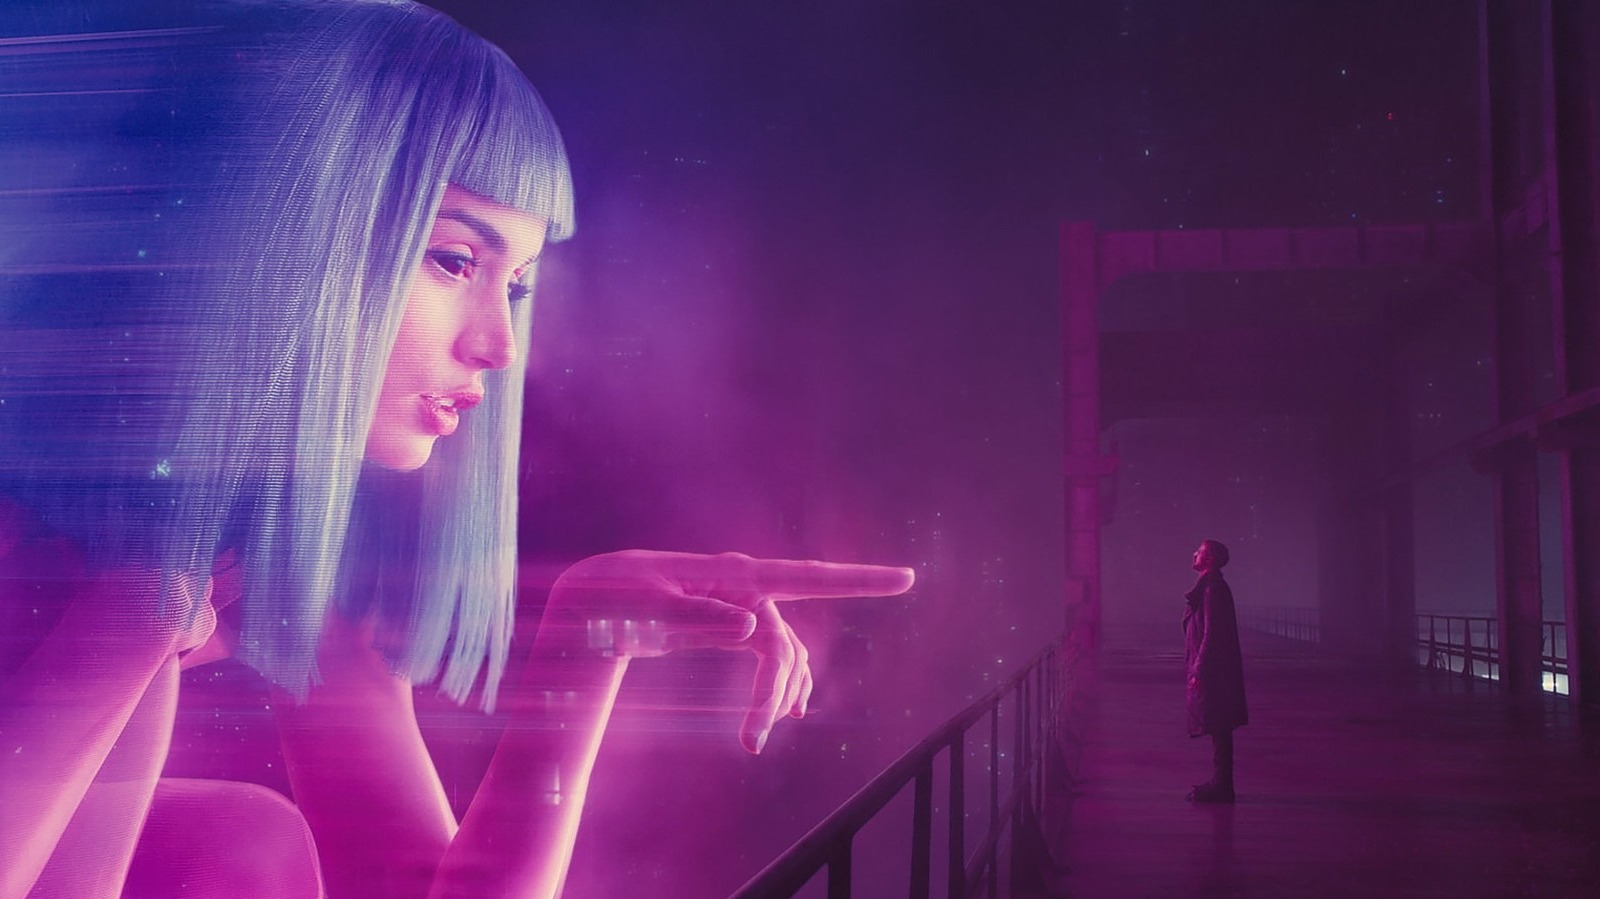 #Blade Runner 2049 Was Too Good To Be A Box Office Hit